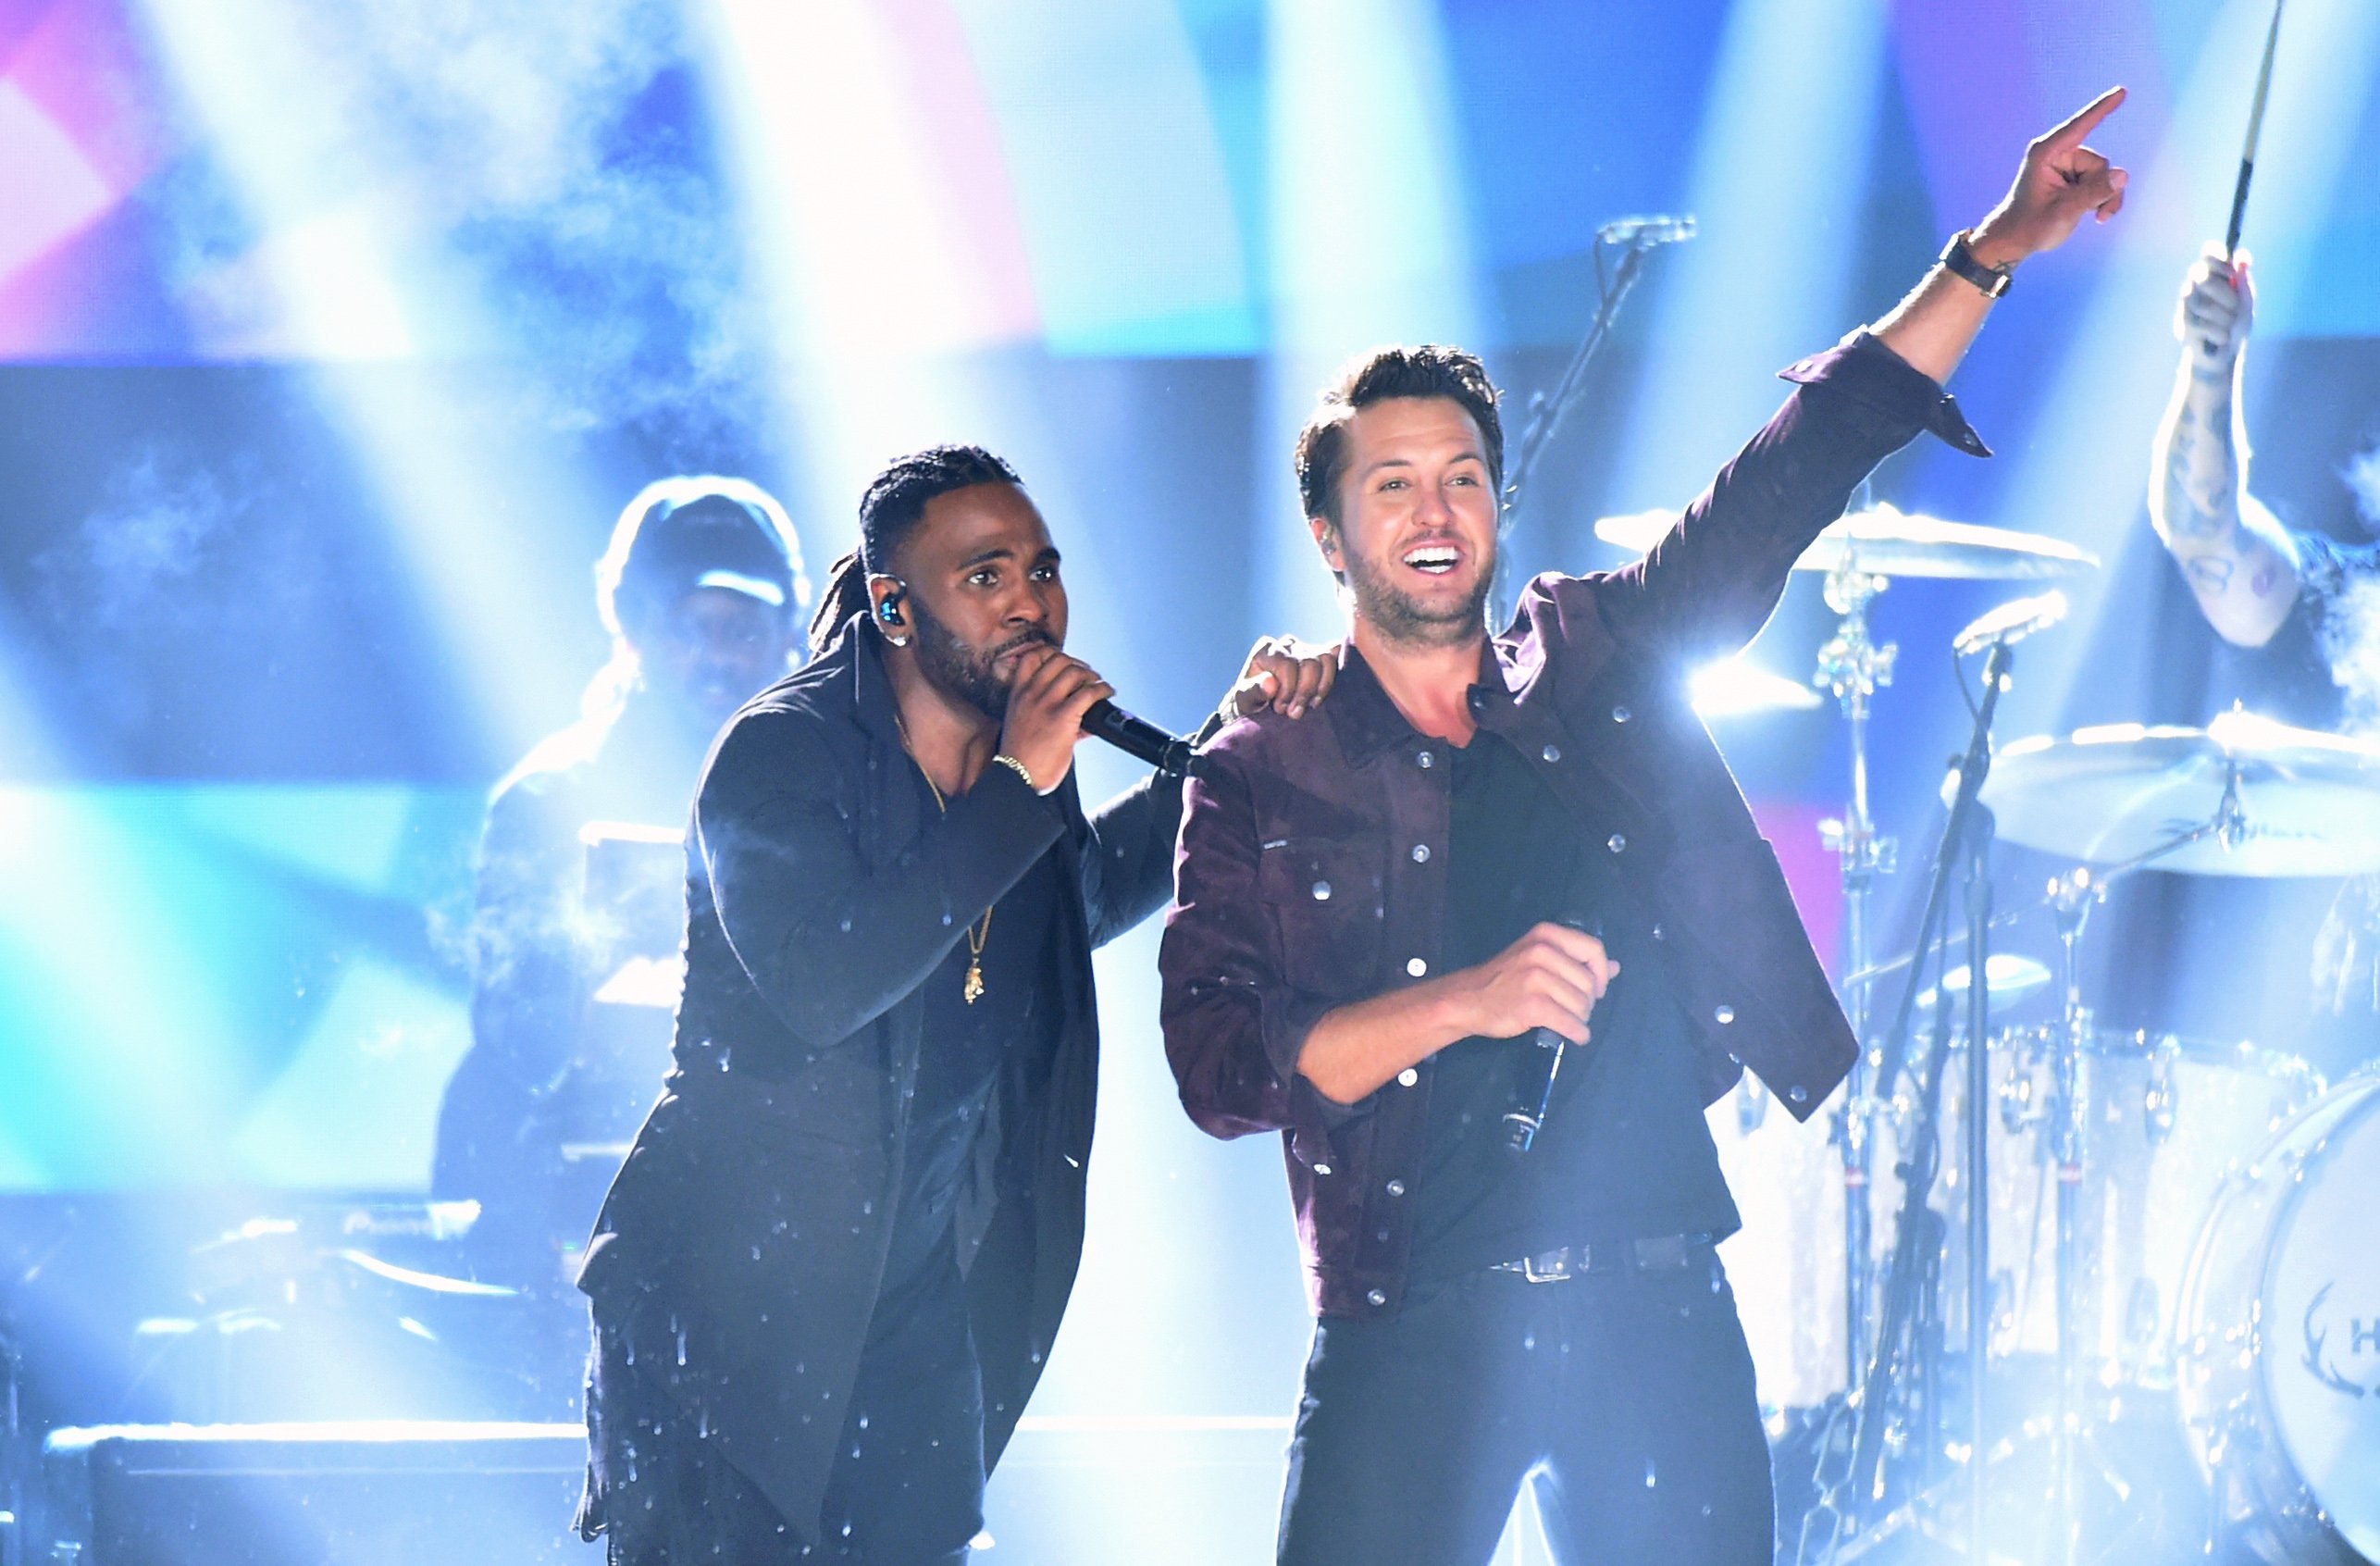 Jason Derulo and Luke Bryan perform during the 2017 CMT Music Awards